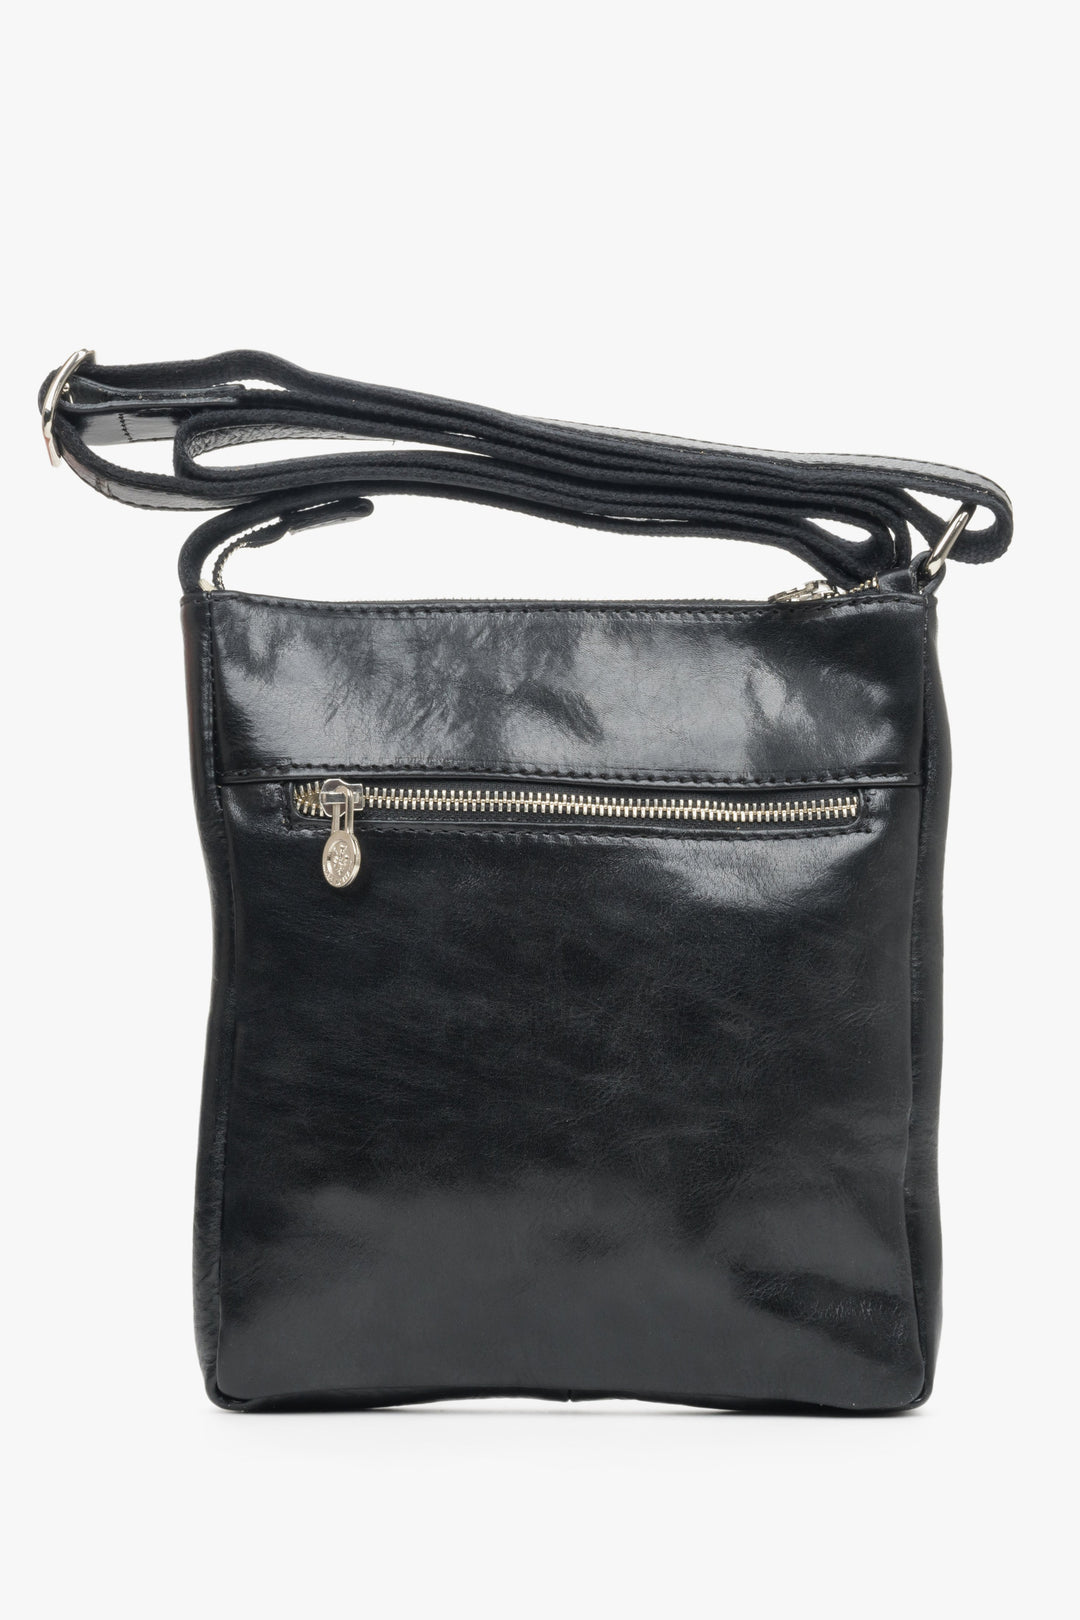 Men's small black shoulder bag, perfect for fall - back view.